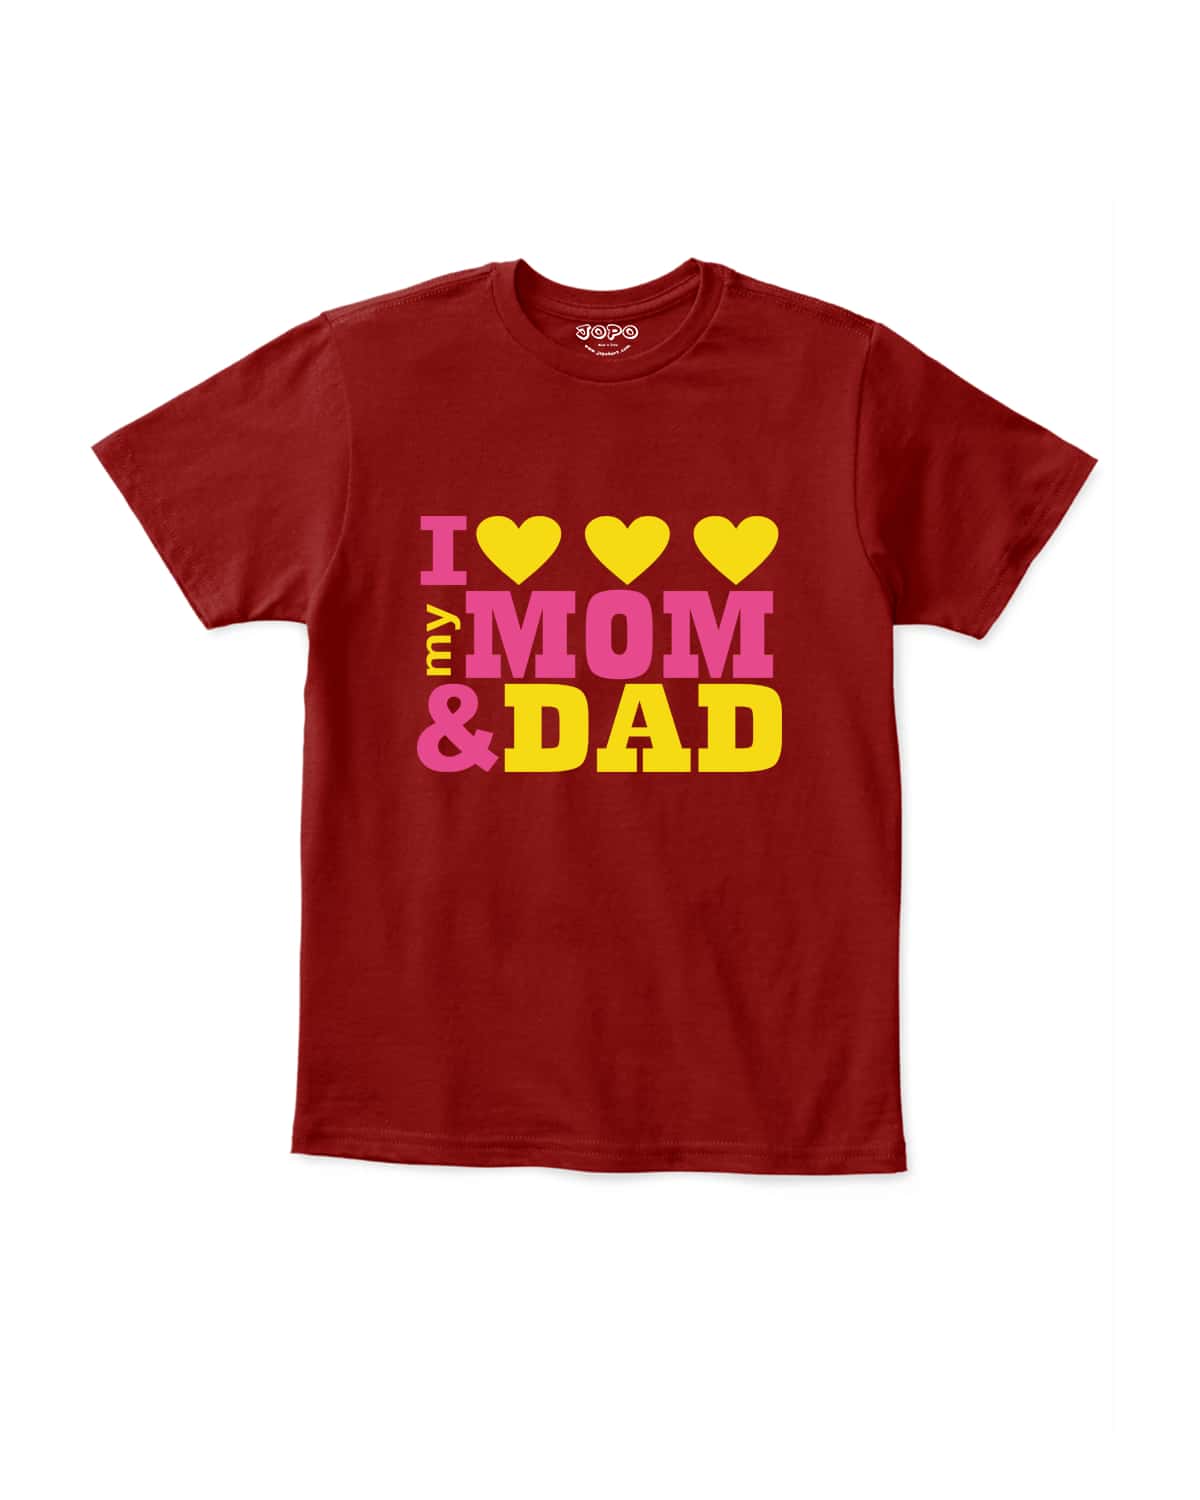 I love mom and Dad Kids printed cute soft cotton T-Shirts